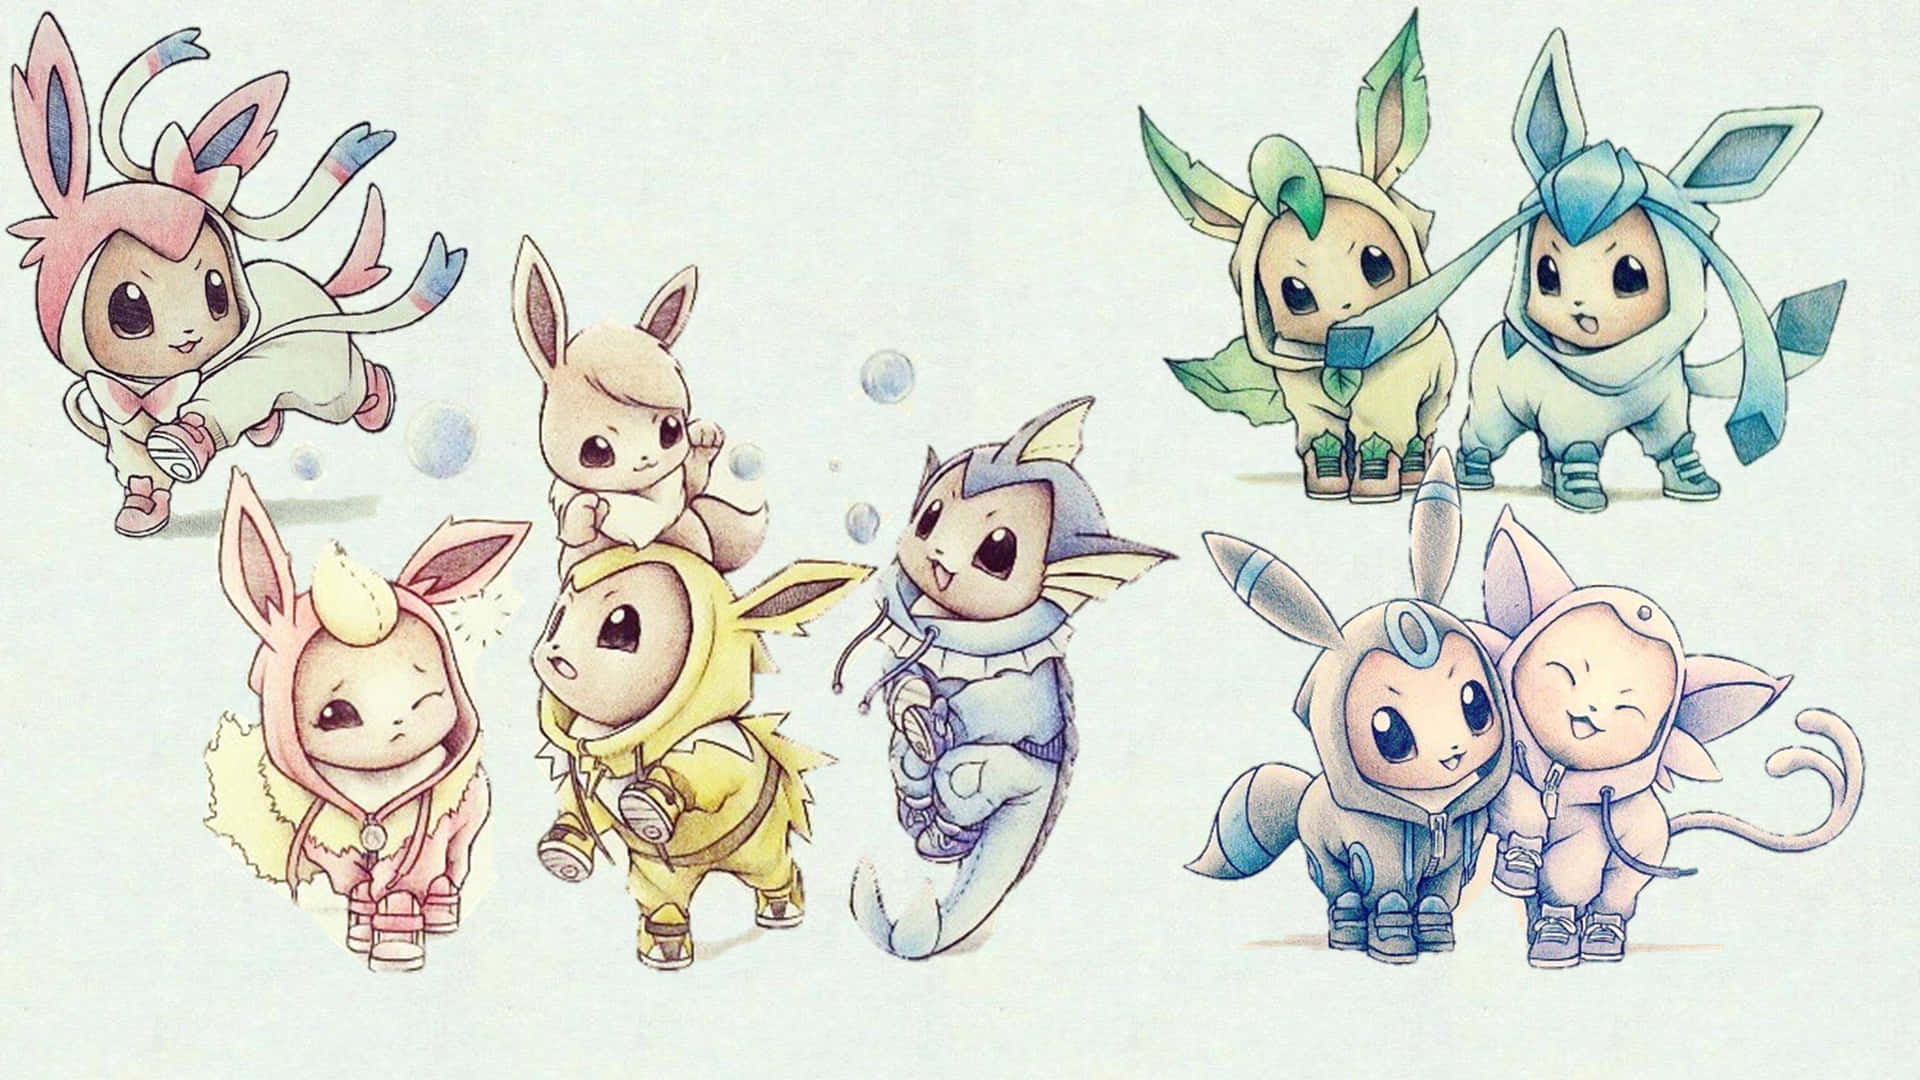 This adorable Eevee is sure to make your heart melt! Wallpaper